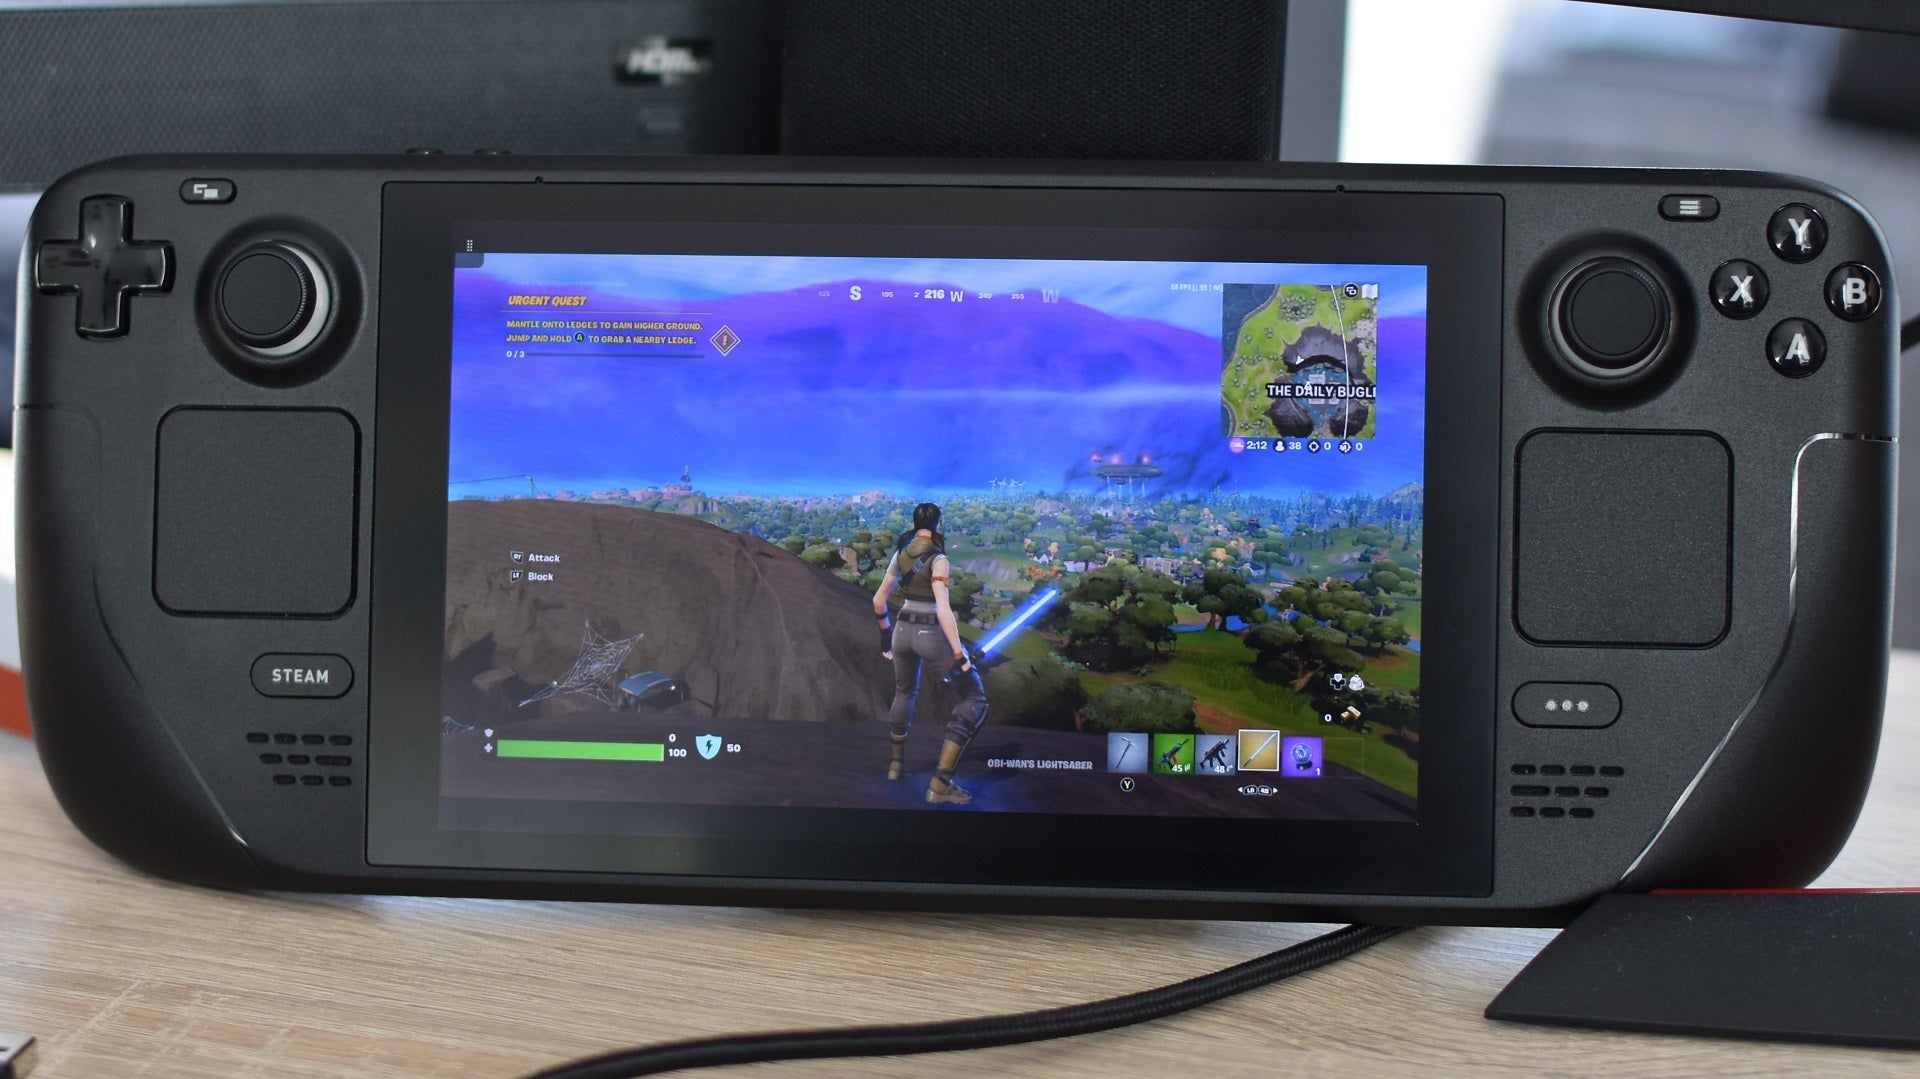 Fortnite running on the Steam Deck, via Xbox Cloud Gaming.